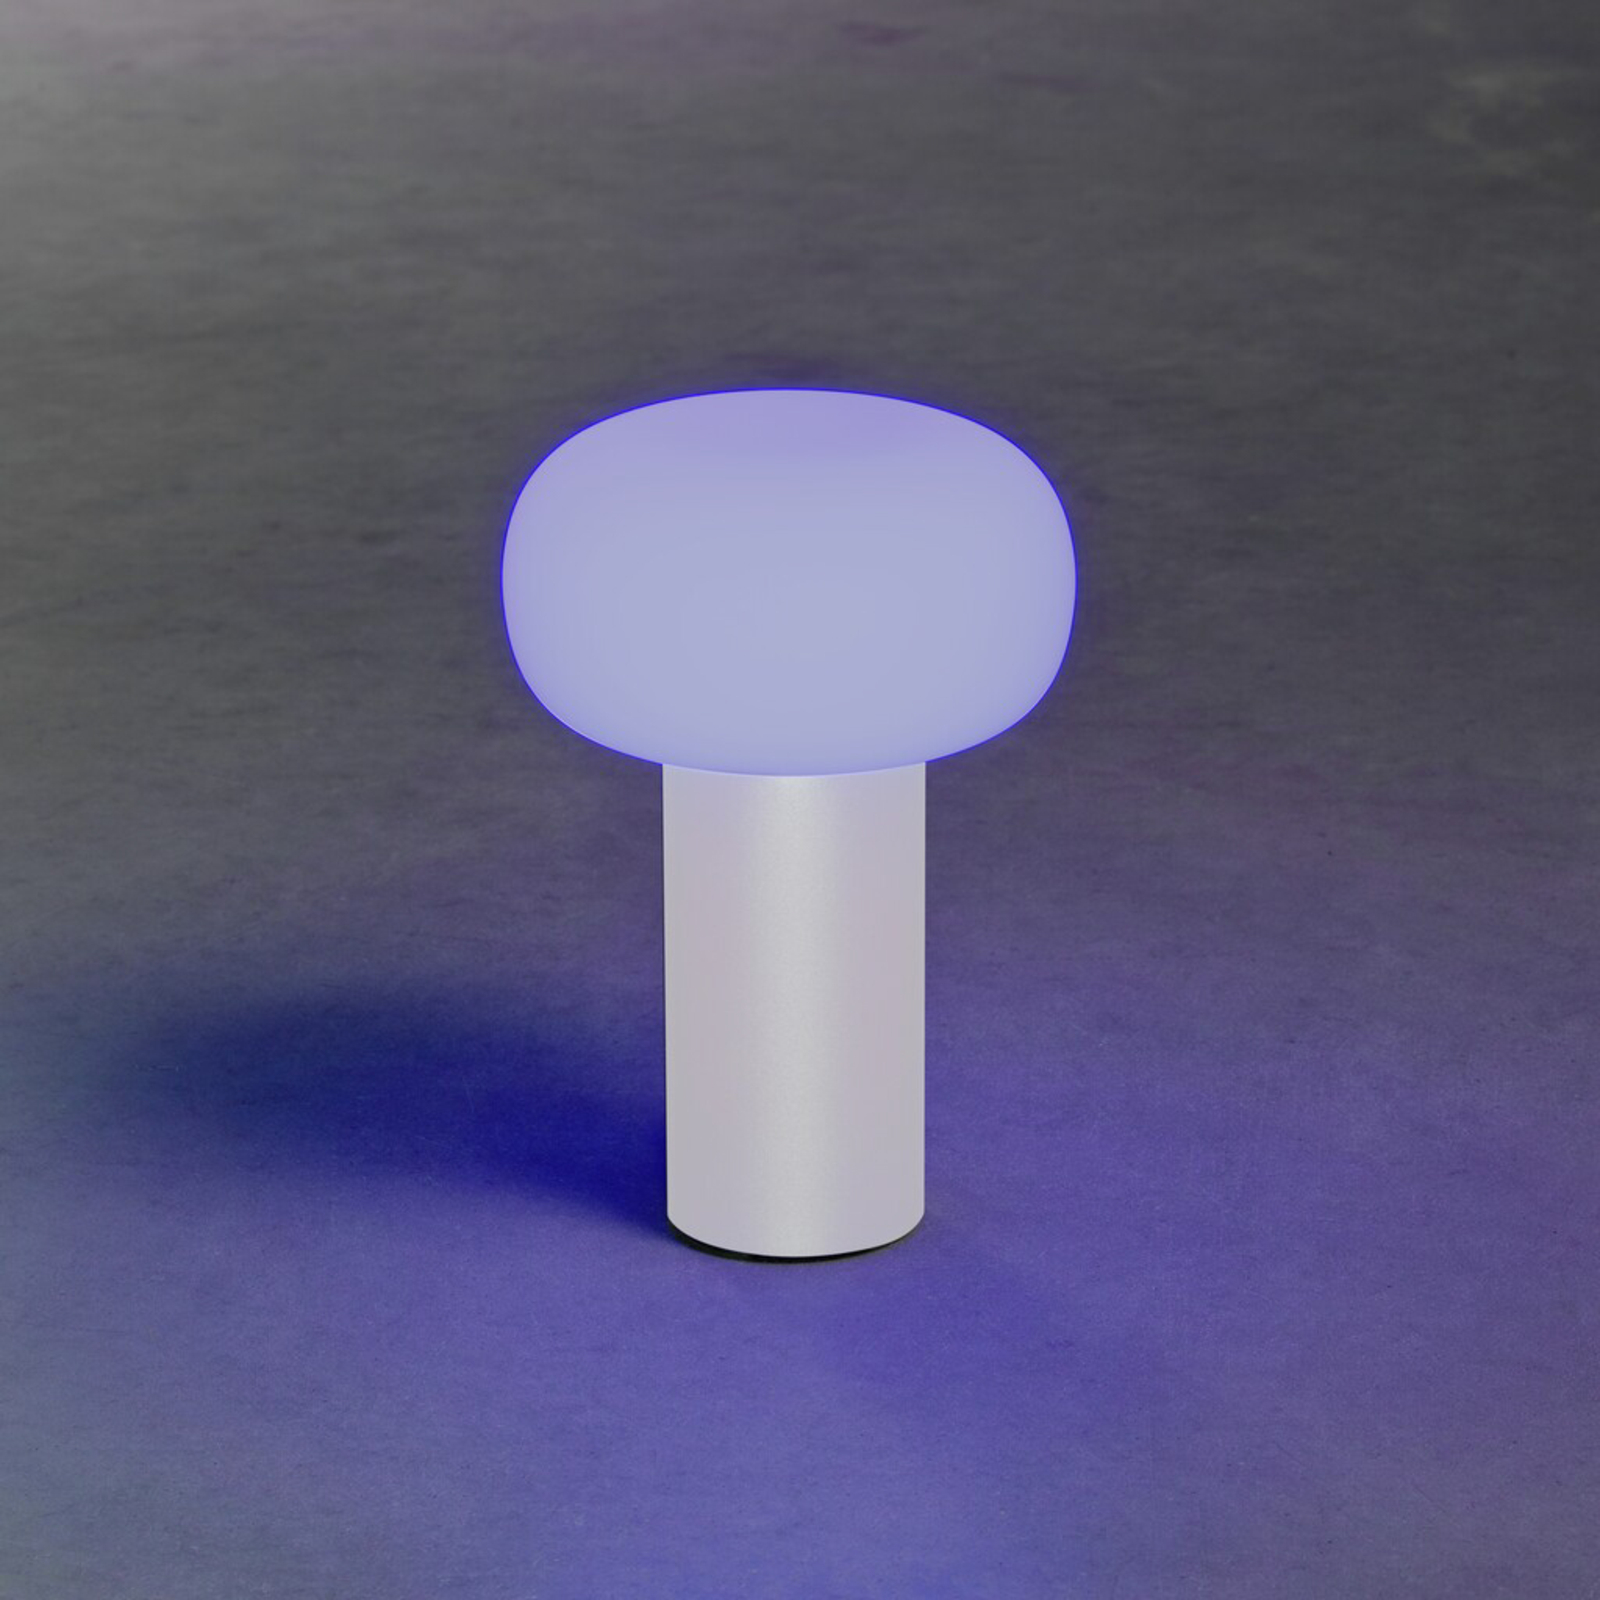 Lampe table LED Antibes IP54 batterie RGBW blanche